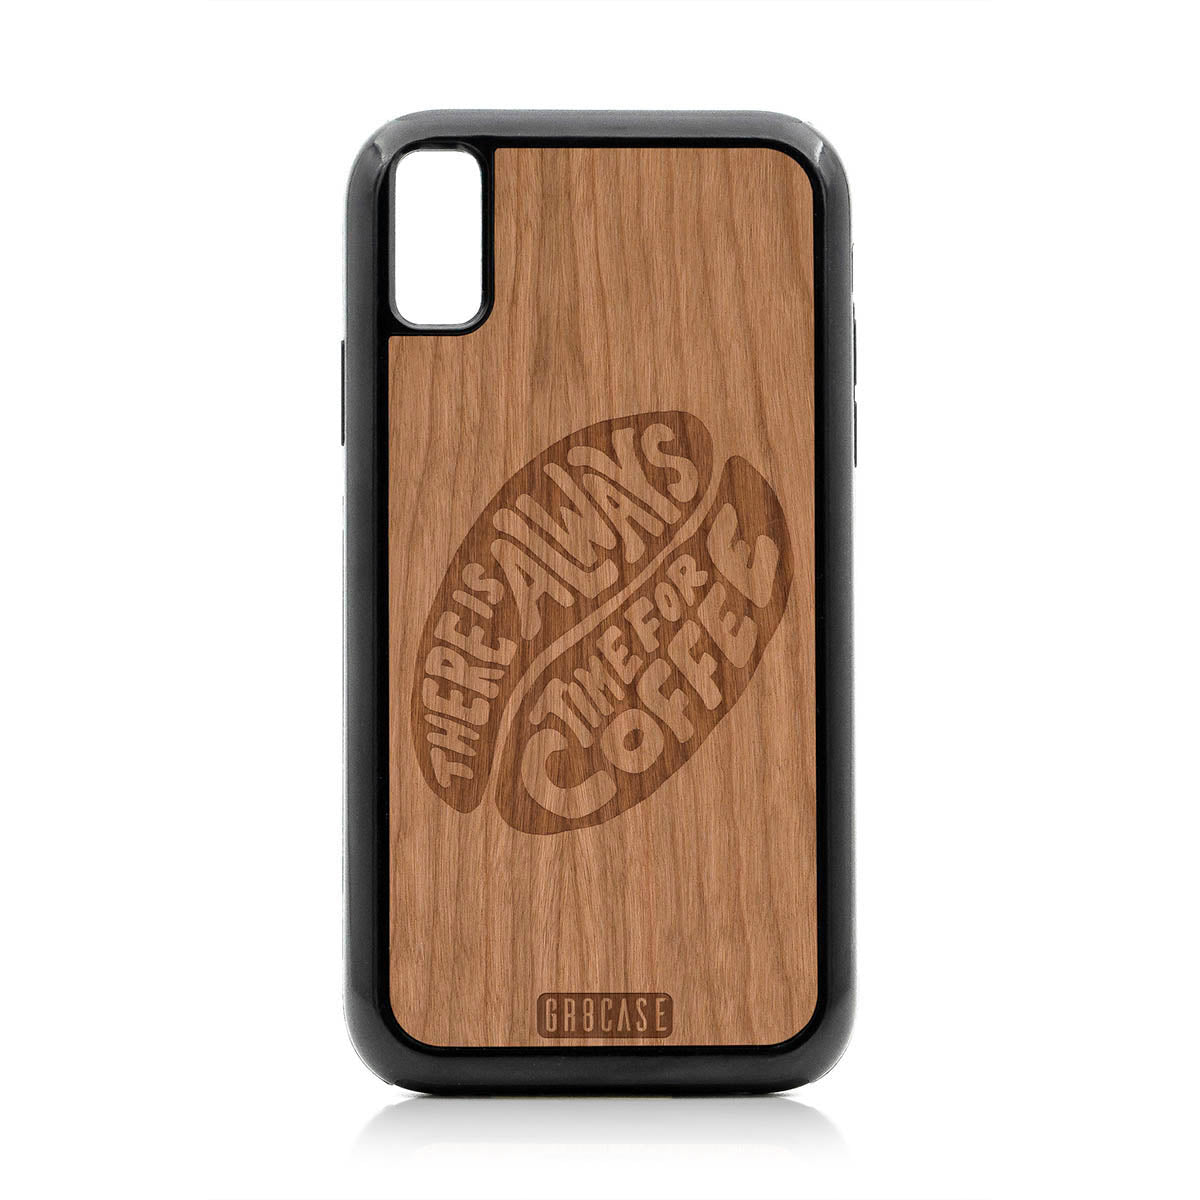 There Is Always Time For Coffee  Design Wood Case For iPhone XR